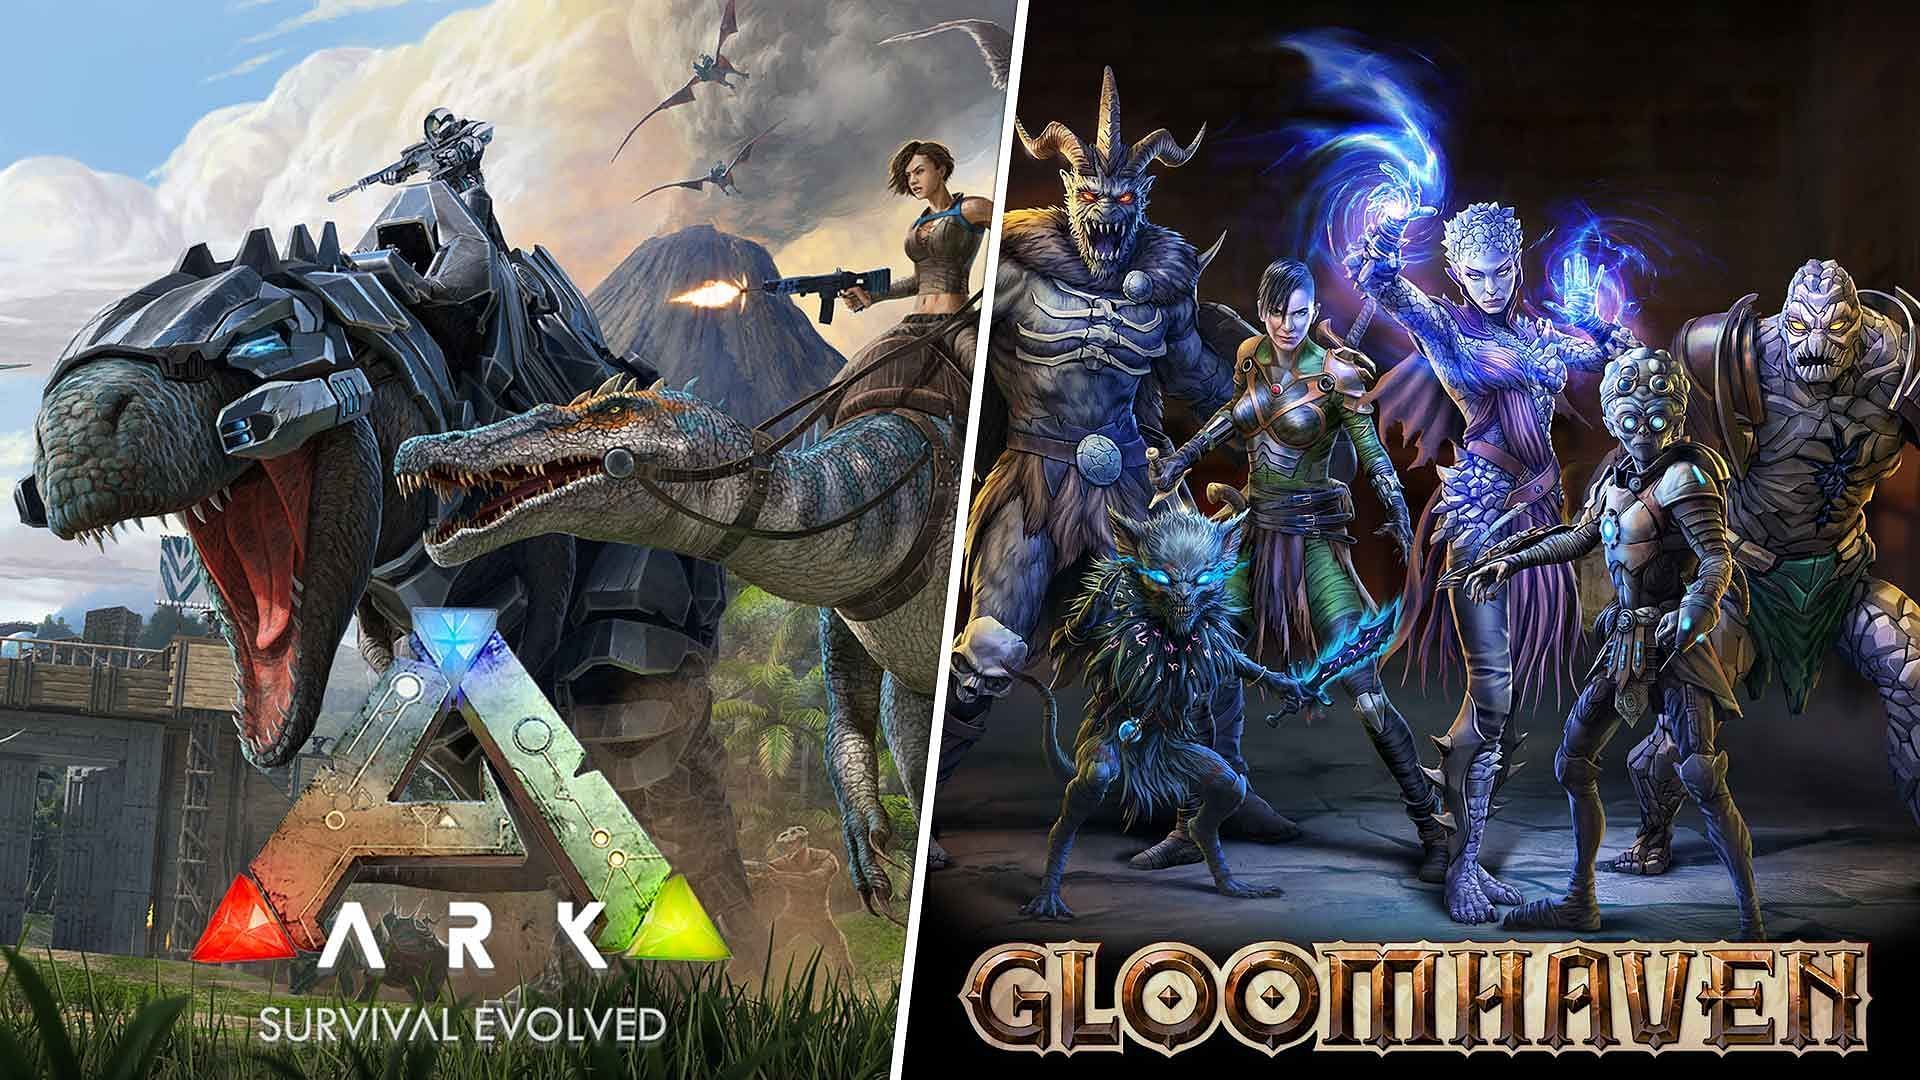 There are two great games on offer (Image Epic Games Store)